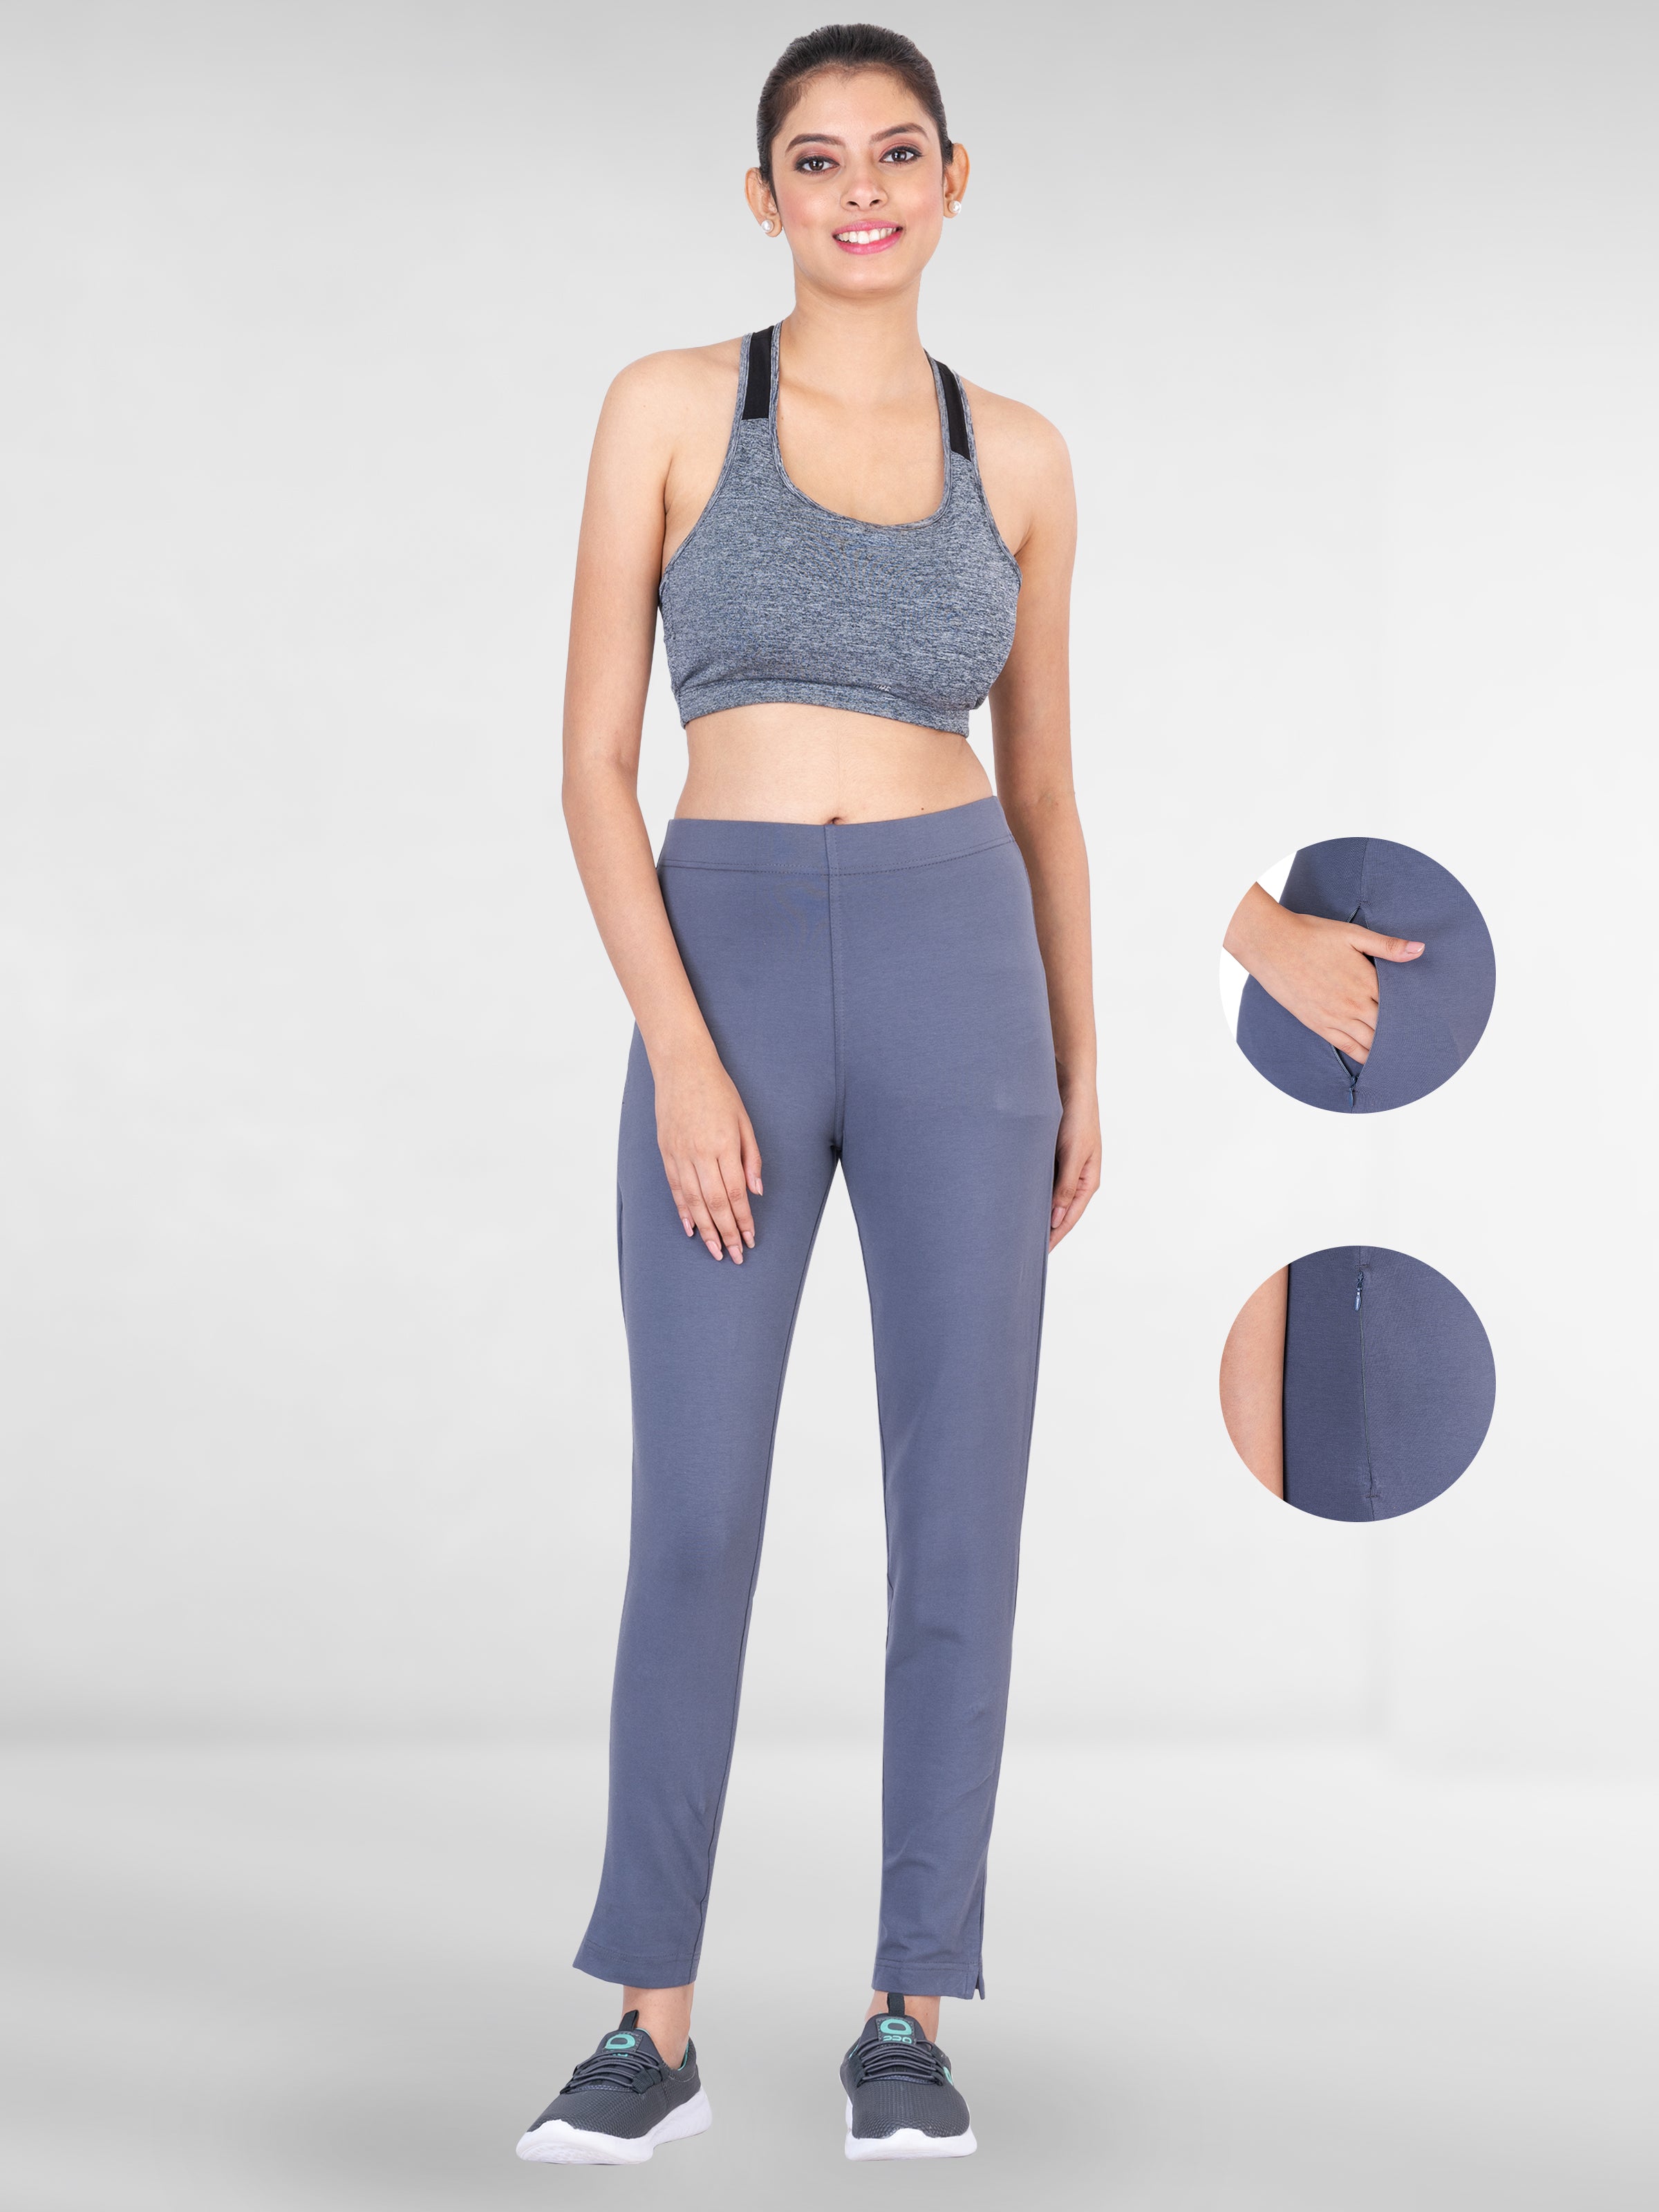 LUX Lyra Women's Ankle Length Perfect Fitting Leggings – Online Shopping  site in India